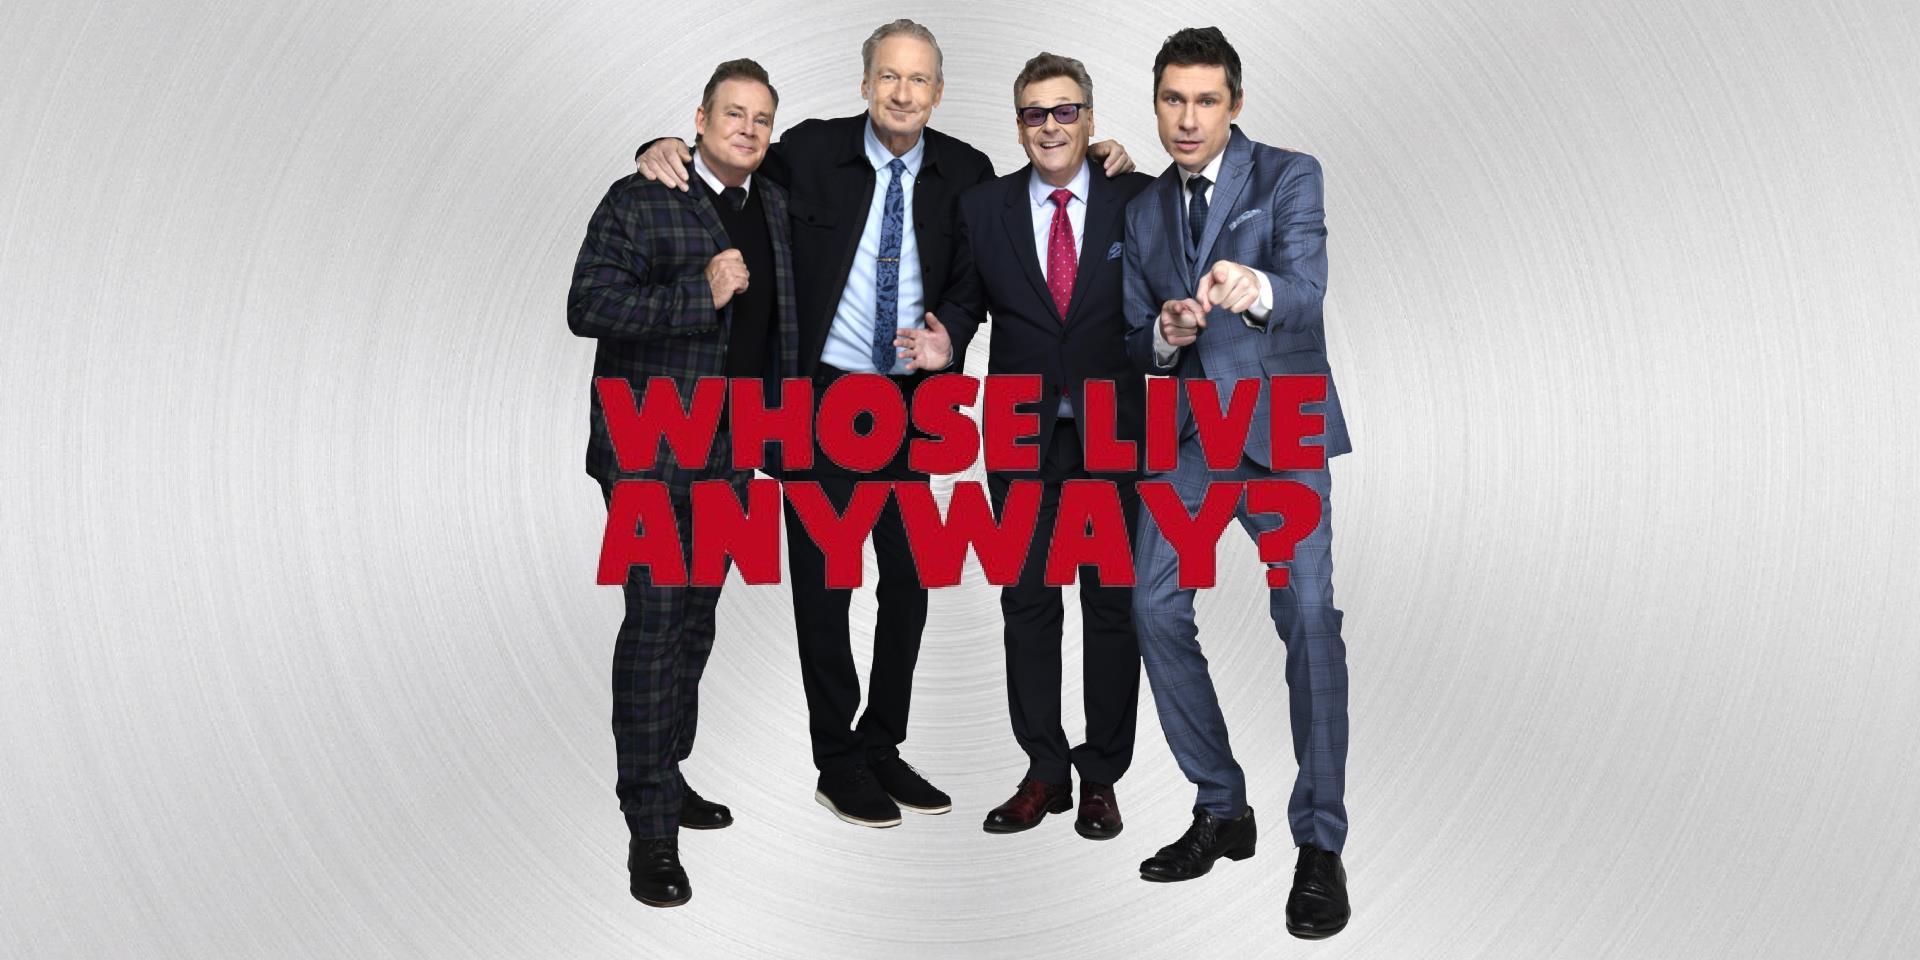 Whose Live Anyway? presented by Martin Media